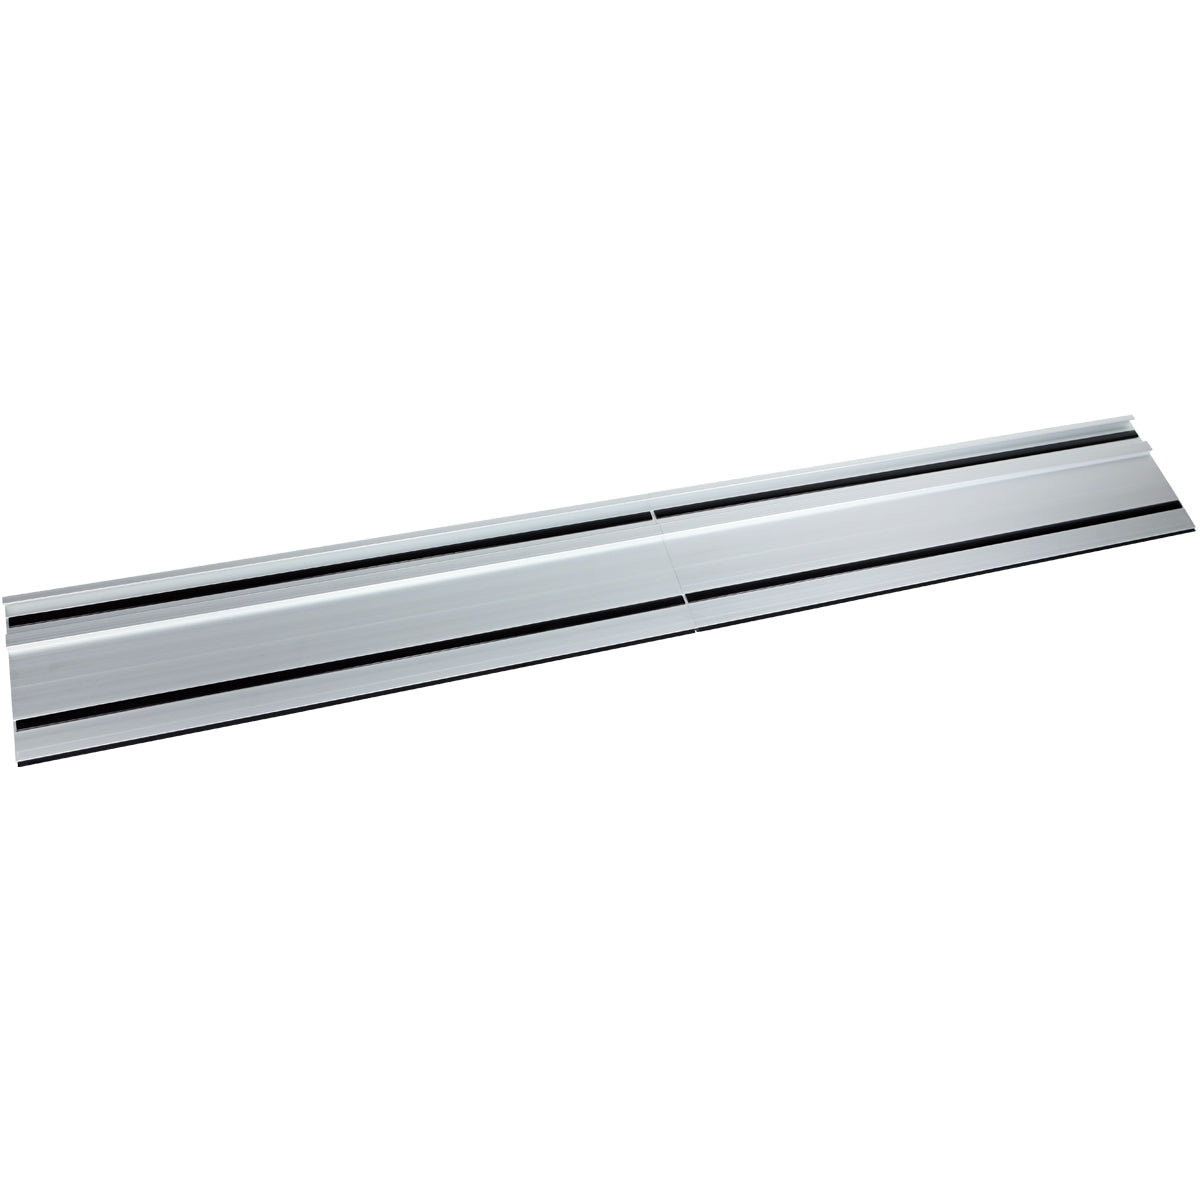 Excel 1.4M Aluminium Plunge Saw Guide Rail (Supplied in 2x700mm plus connector)